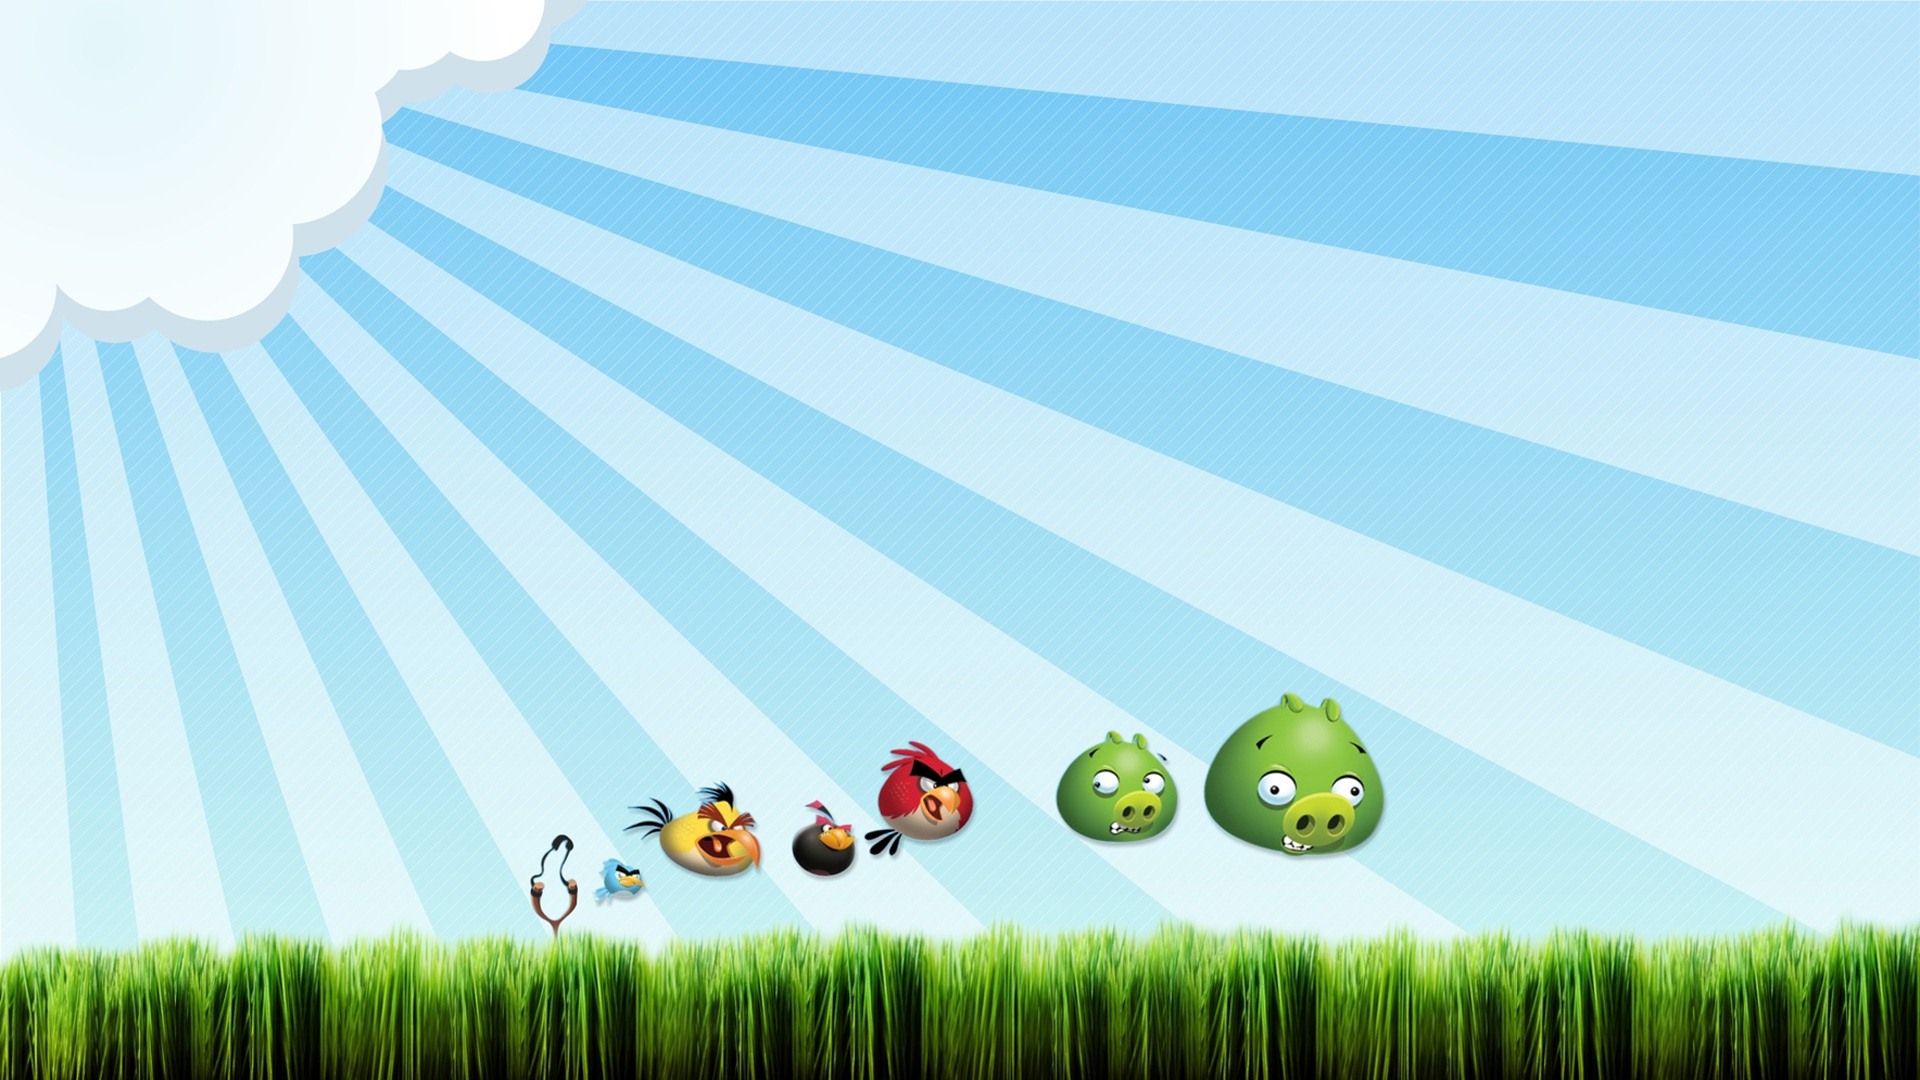 Angry Birds Game Wallpapers #4 - 1920x1080